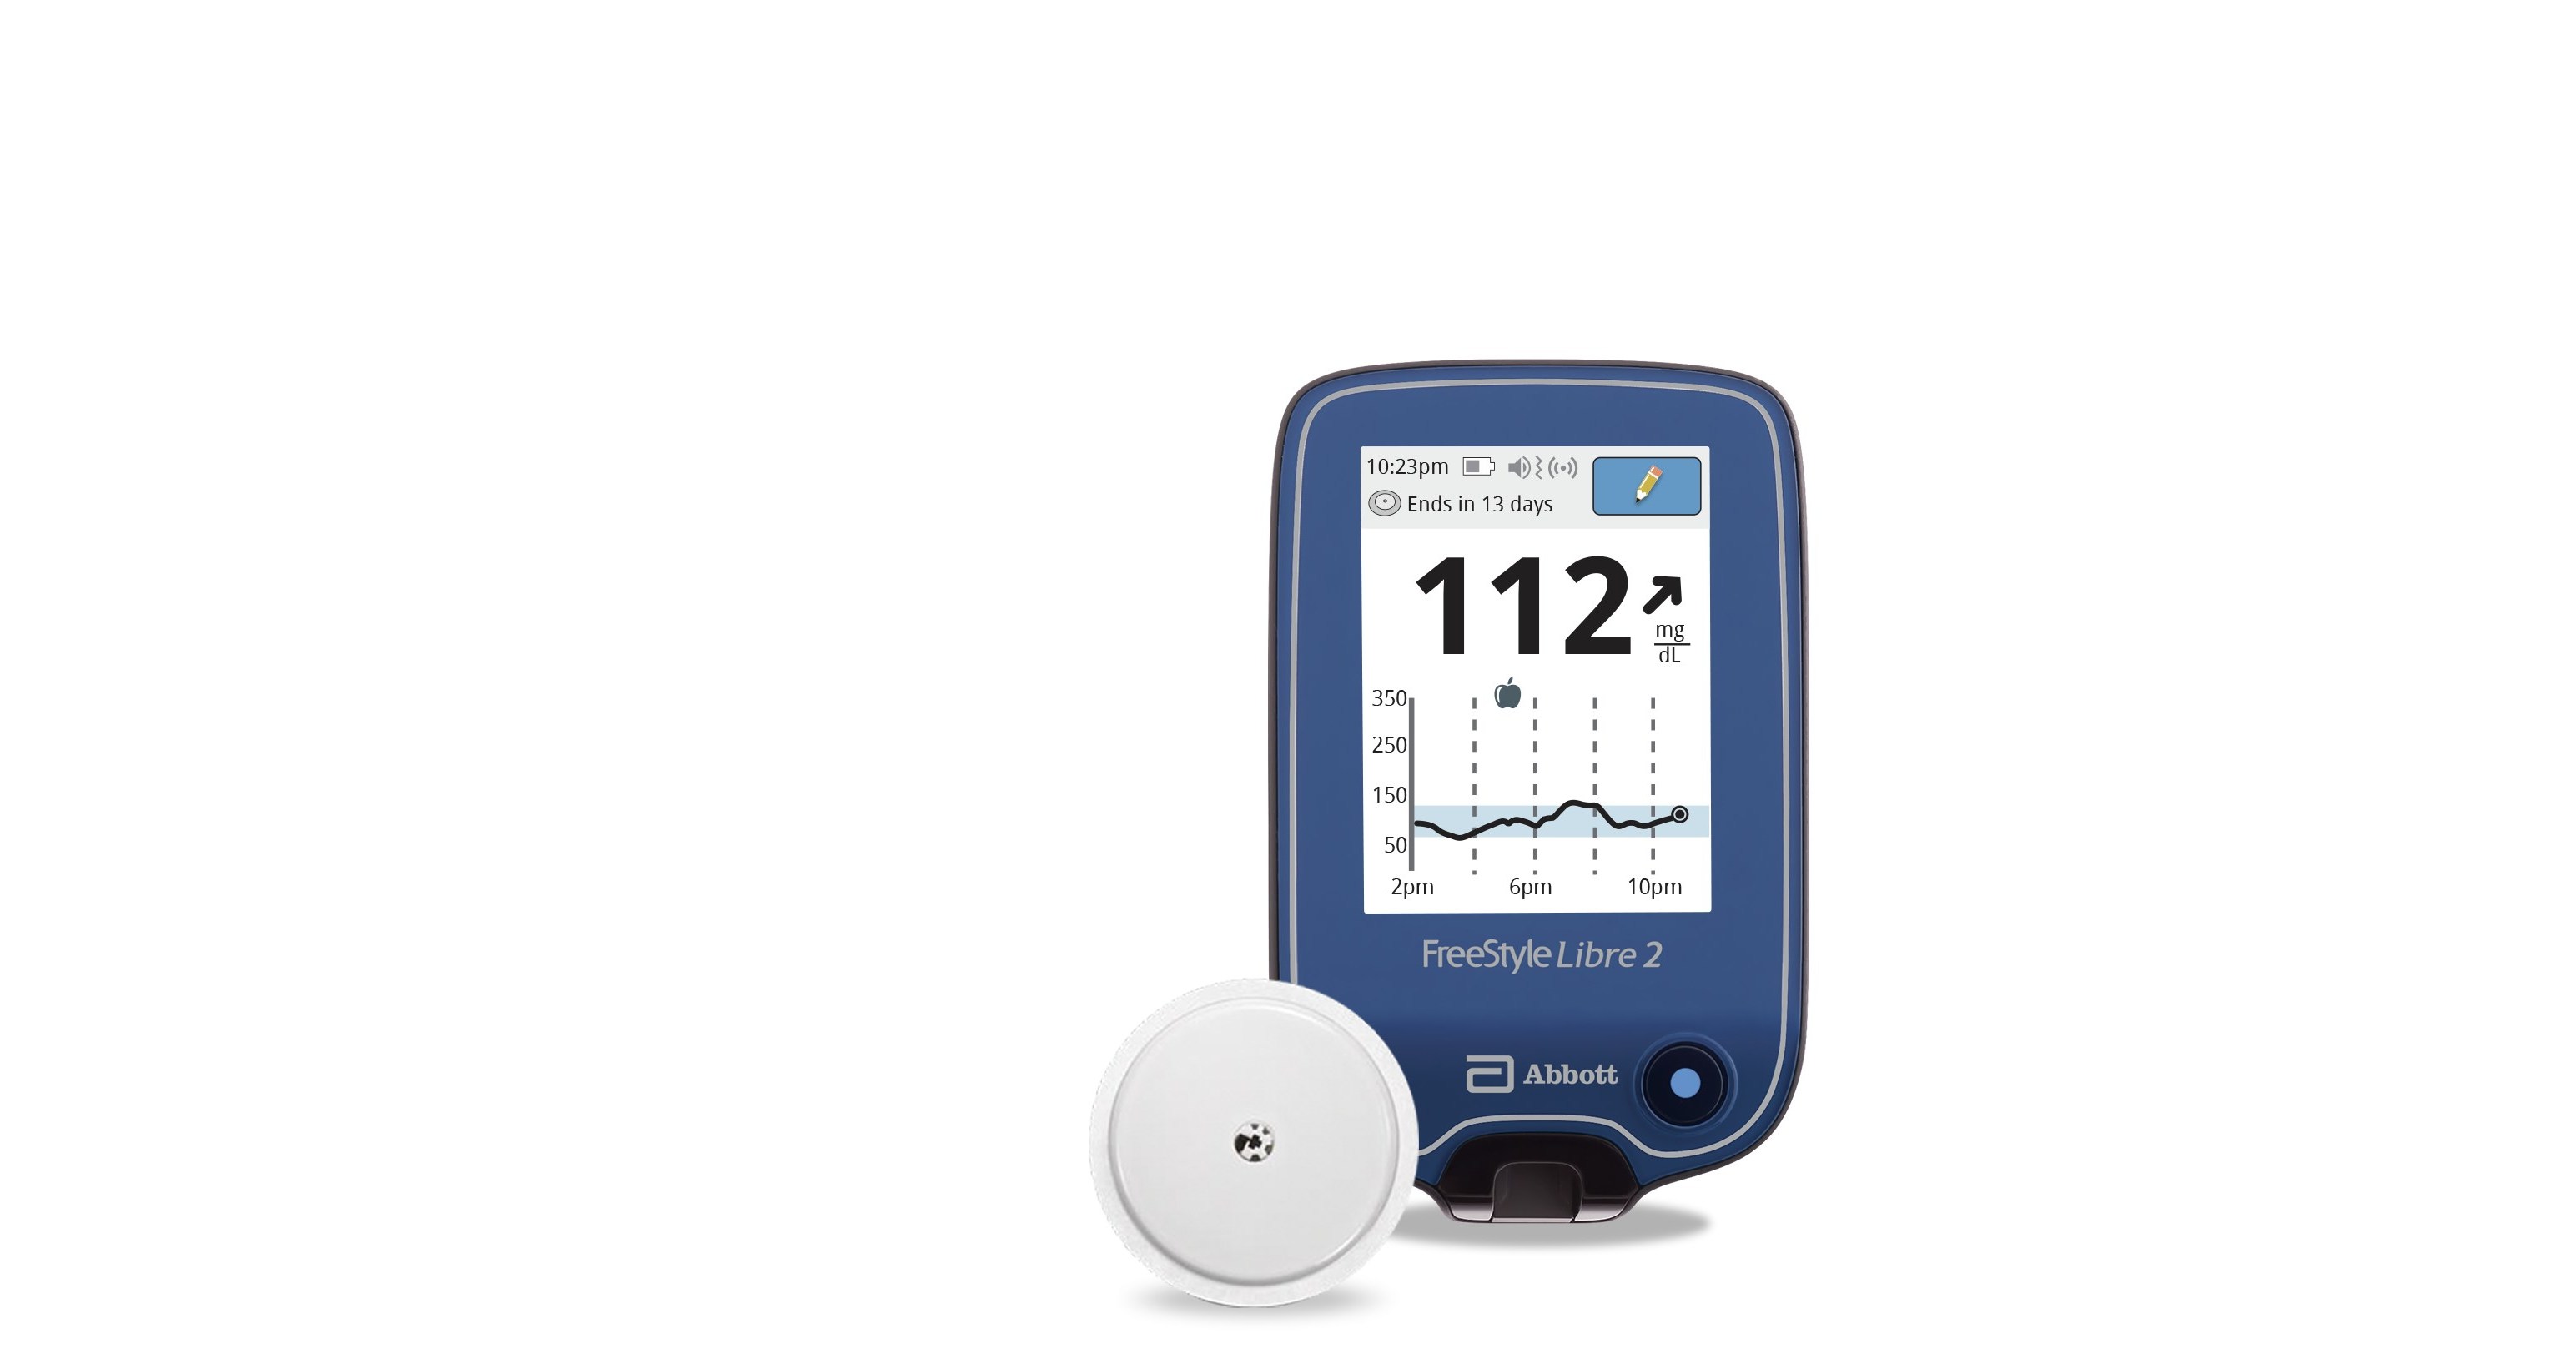 Abbott S Freestyle Libre 2 Icgm Cleared In U S For Adults And Children With Diabetes Achieving Highest Level Of Accuracy And Performance Standards Jun 15